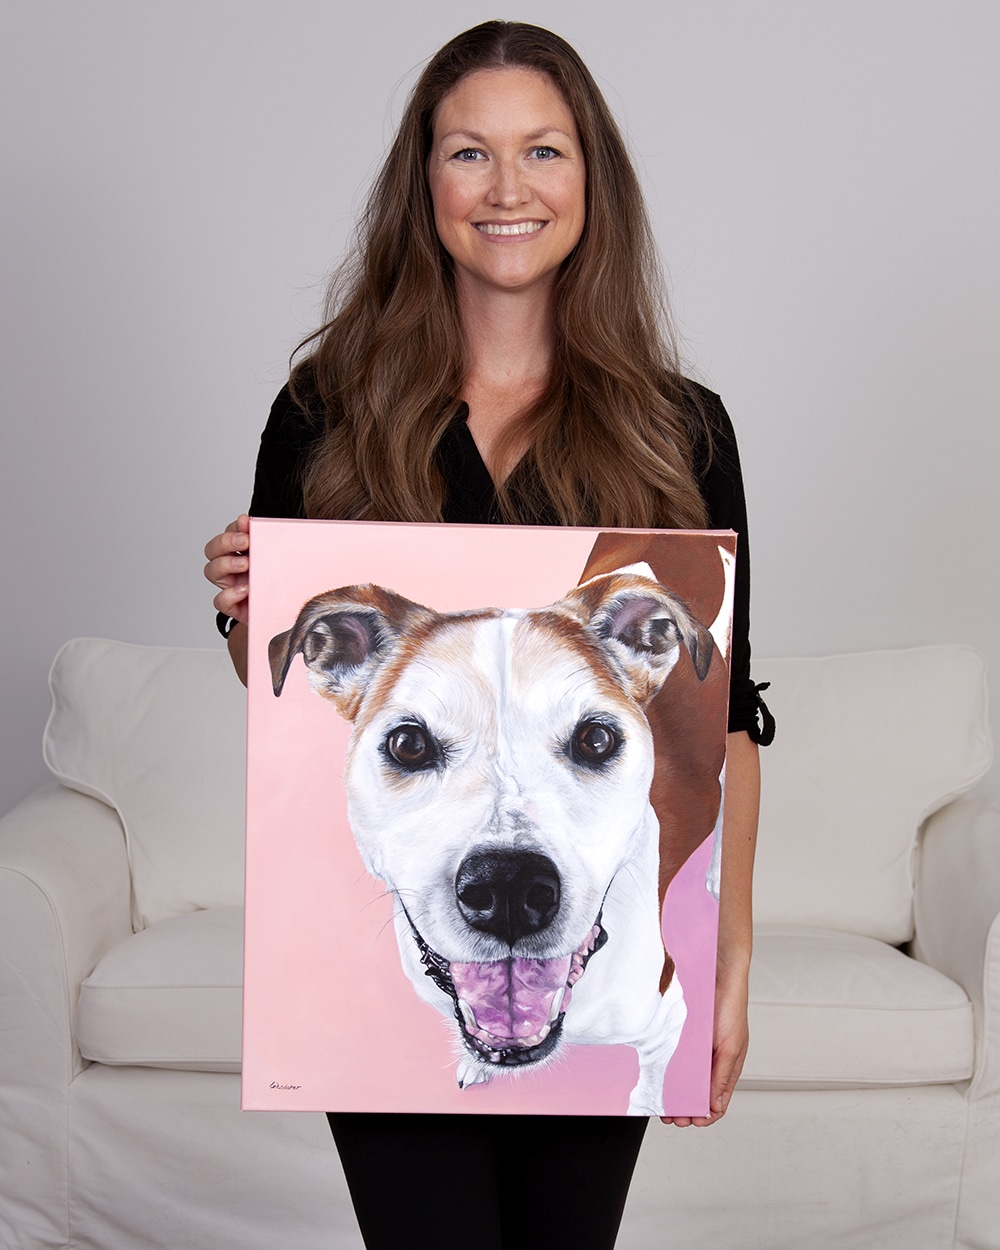 Fine arts painter Erica Eriksdotter holds her custom dog portrait of a pitbull boxer and hound mix